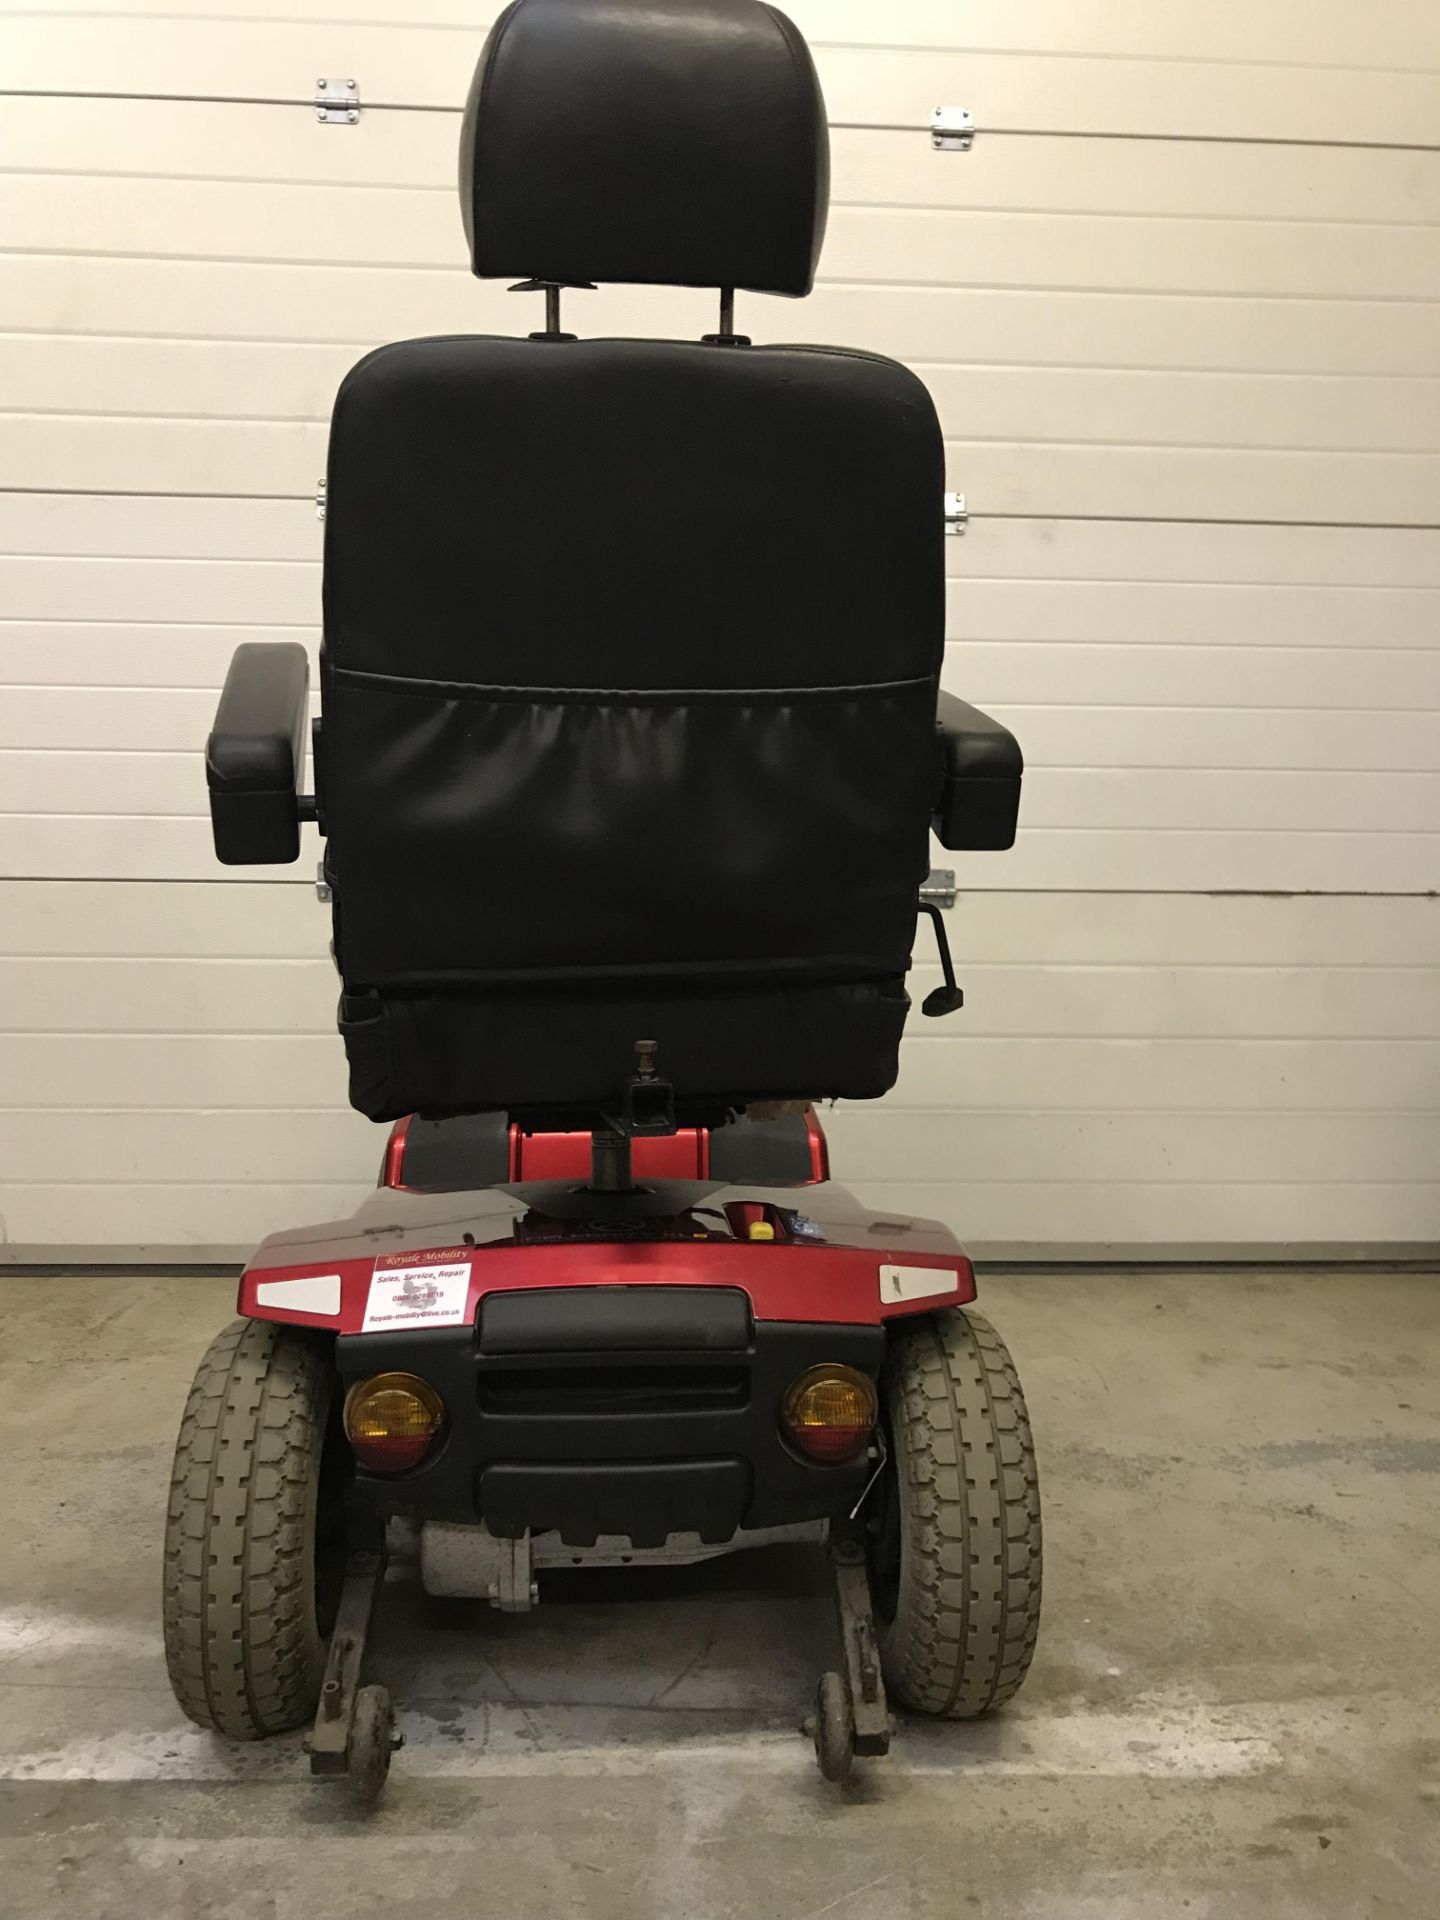 PRIDE CELEBRITY XL8 MOBILITY SCOOTER SPECIFICATION - Image 2 of 5